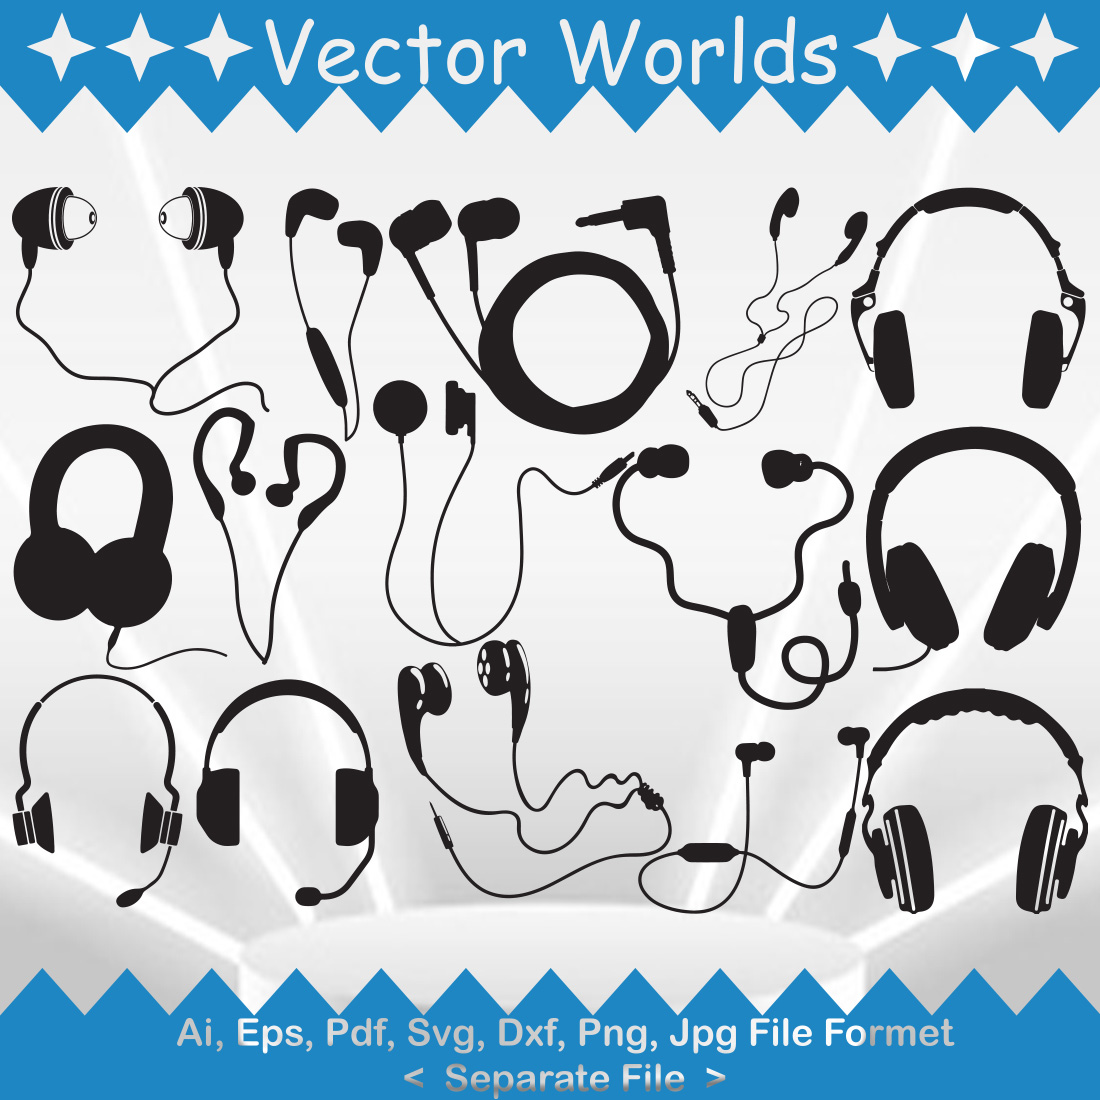 A pack of wonderful images of earphones silhouettes